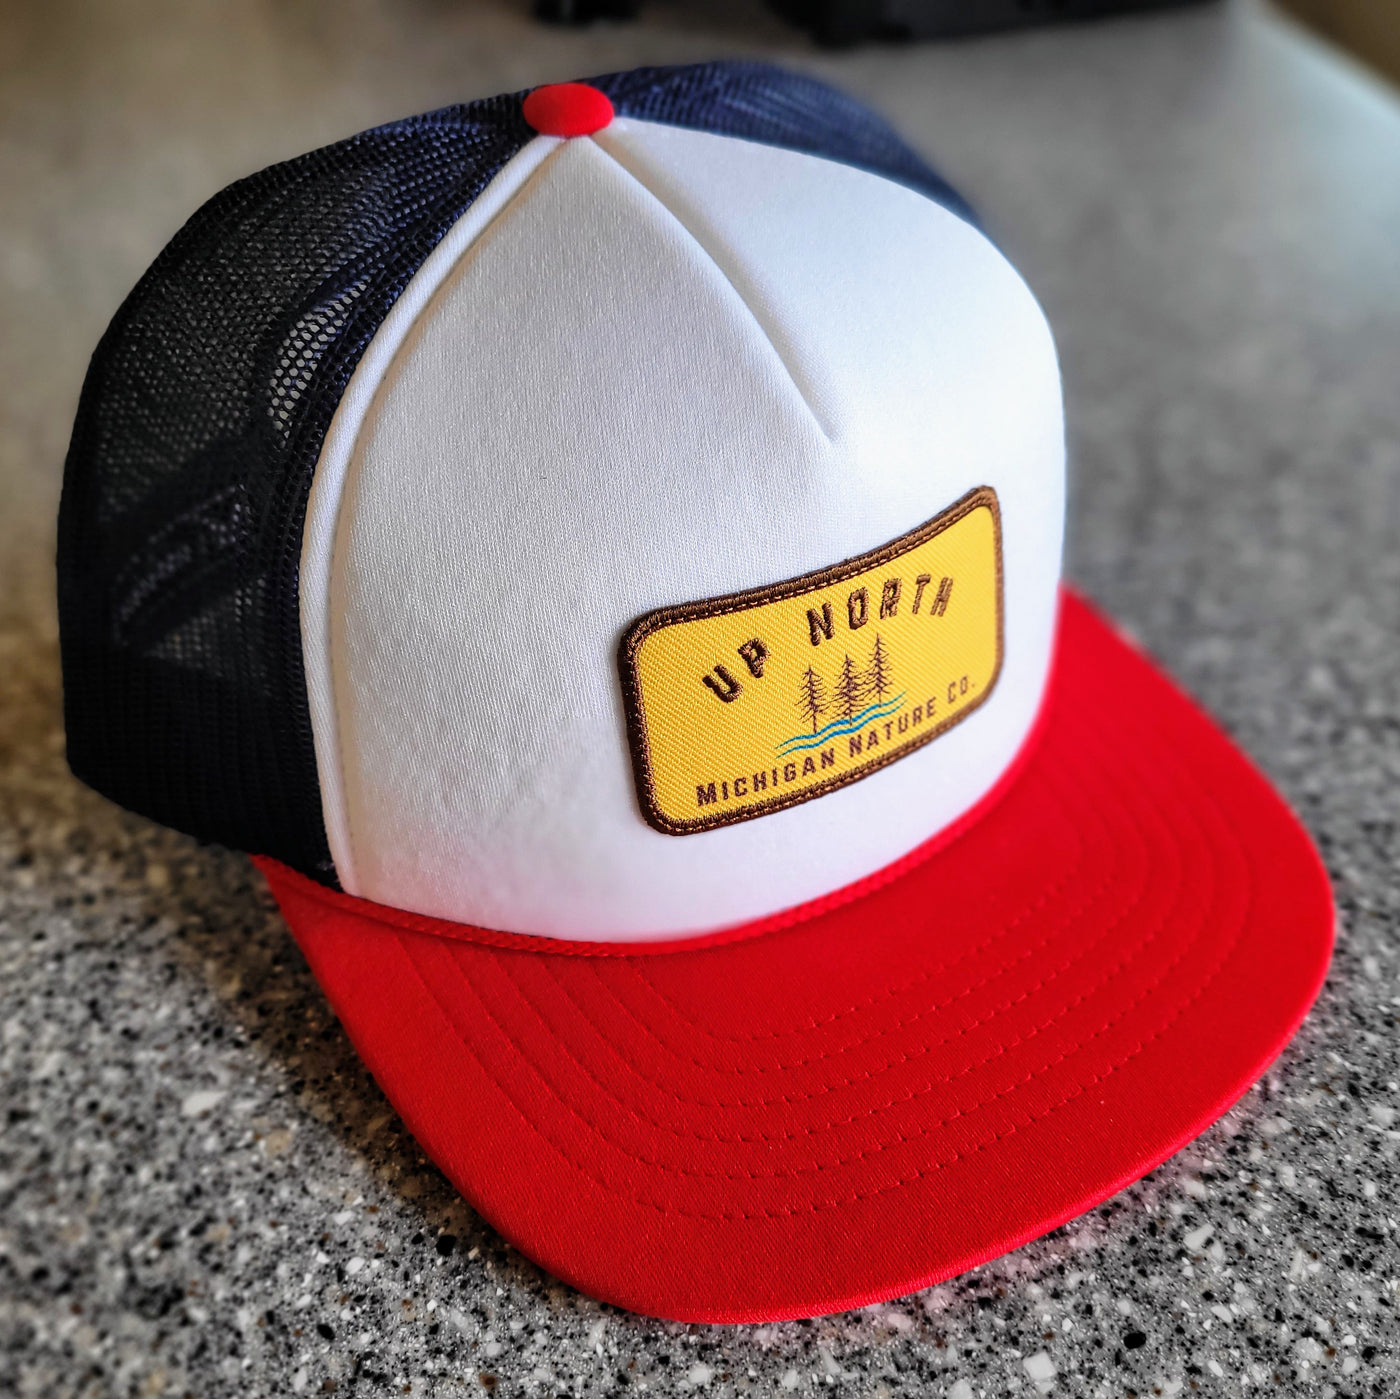 Up North Mesh Snapback-Red, White & Blue